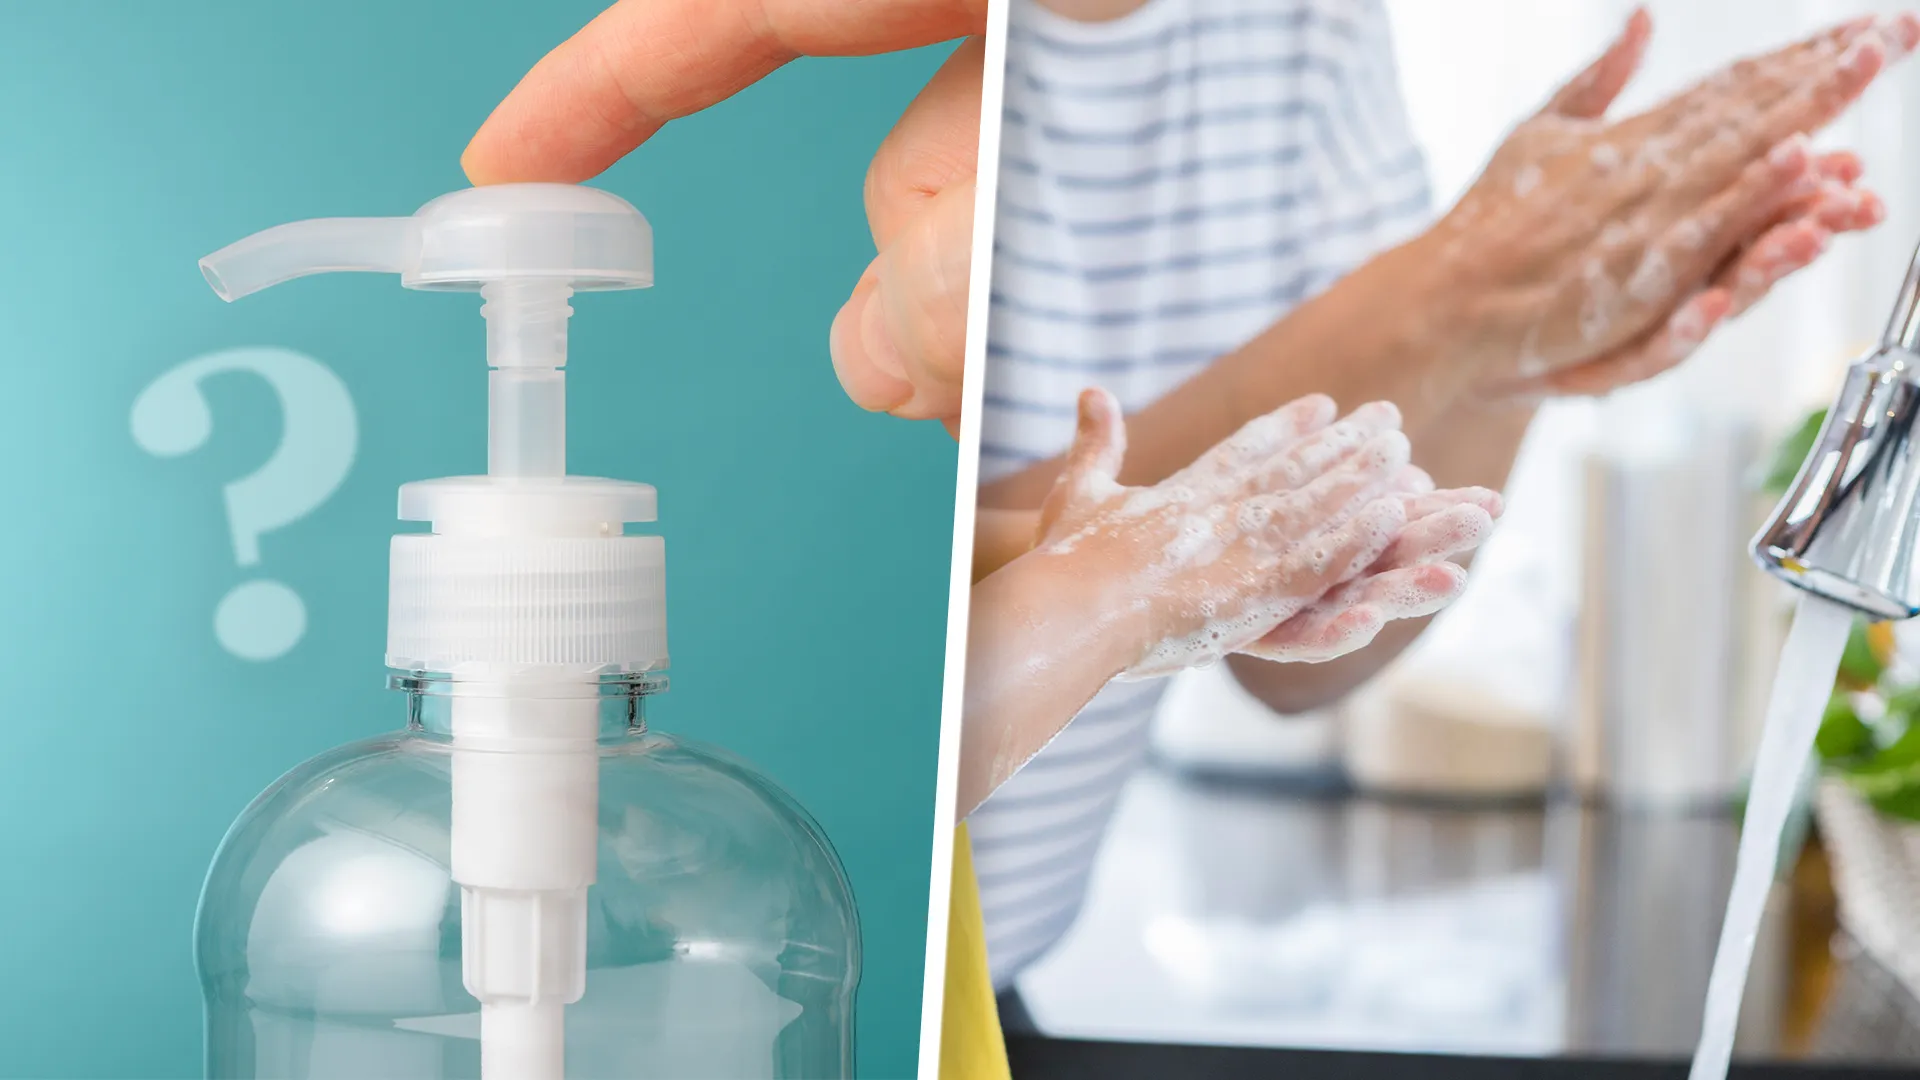 If Soap and Water Are Not Available, Hand Sanitizers May Be a Good Alternative | FDA